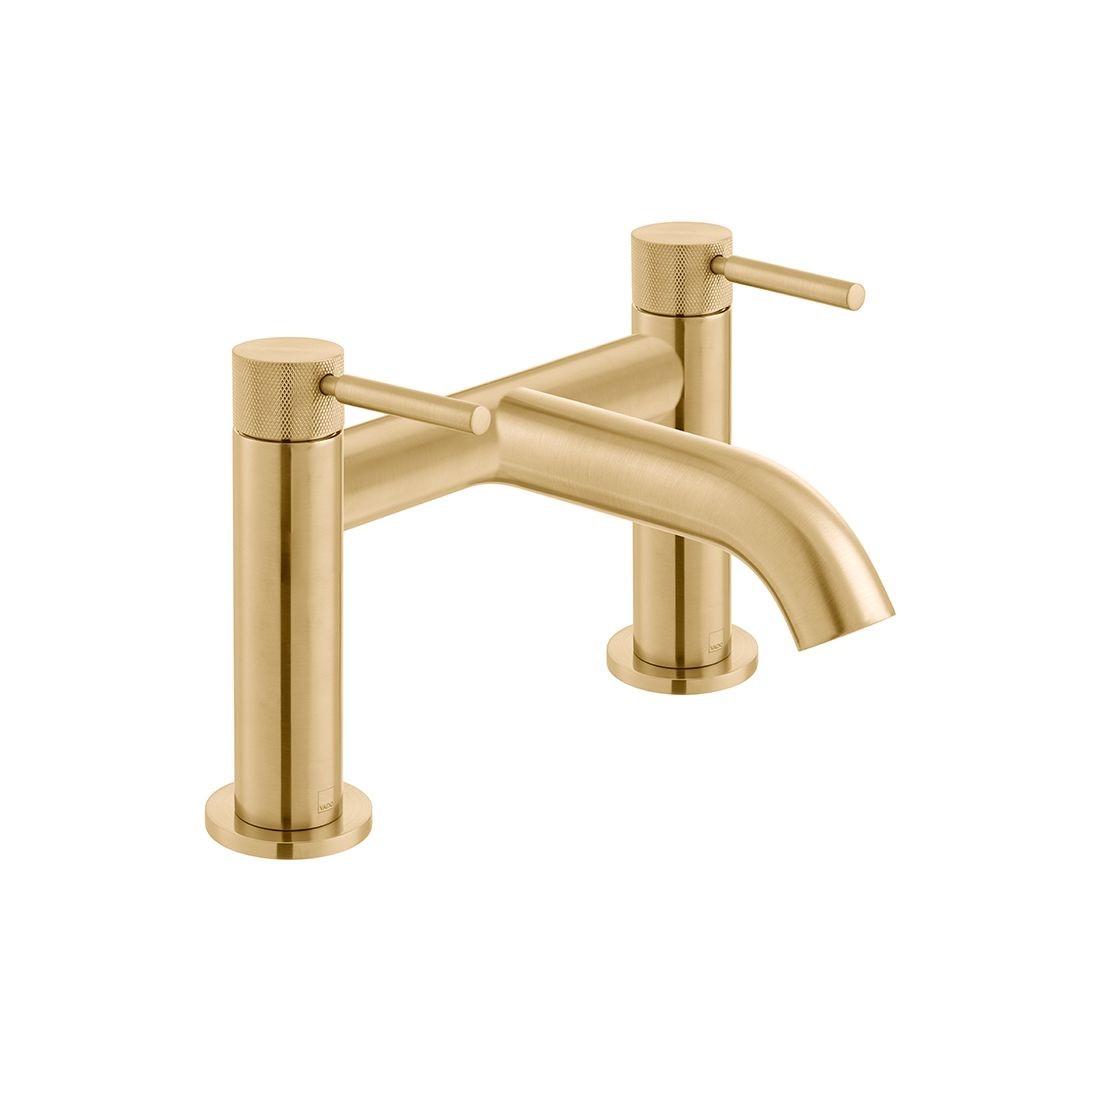 Individual by Vado Origins Deck Mounted Bridge Bath Filler Tap with Knurled Accents Brushed Gold [IND-ORI237-BRGK]